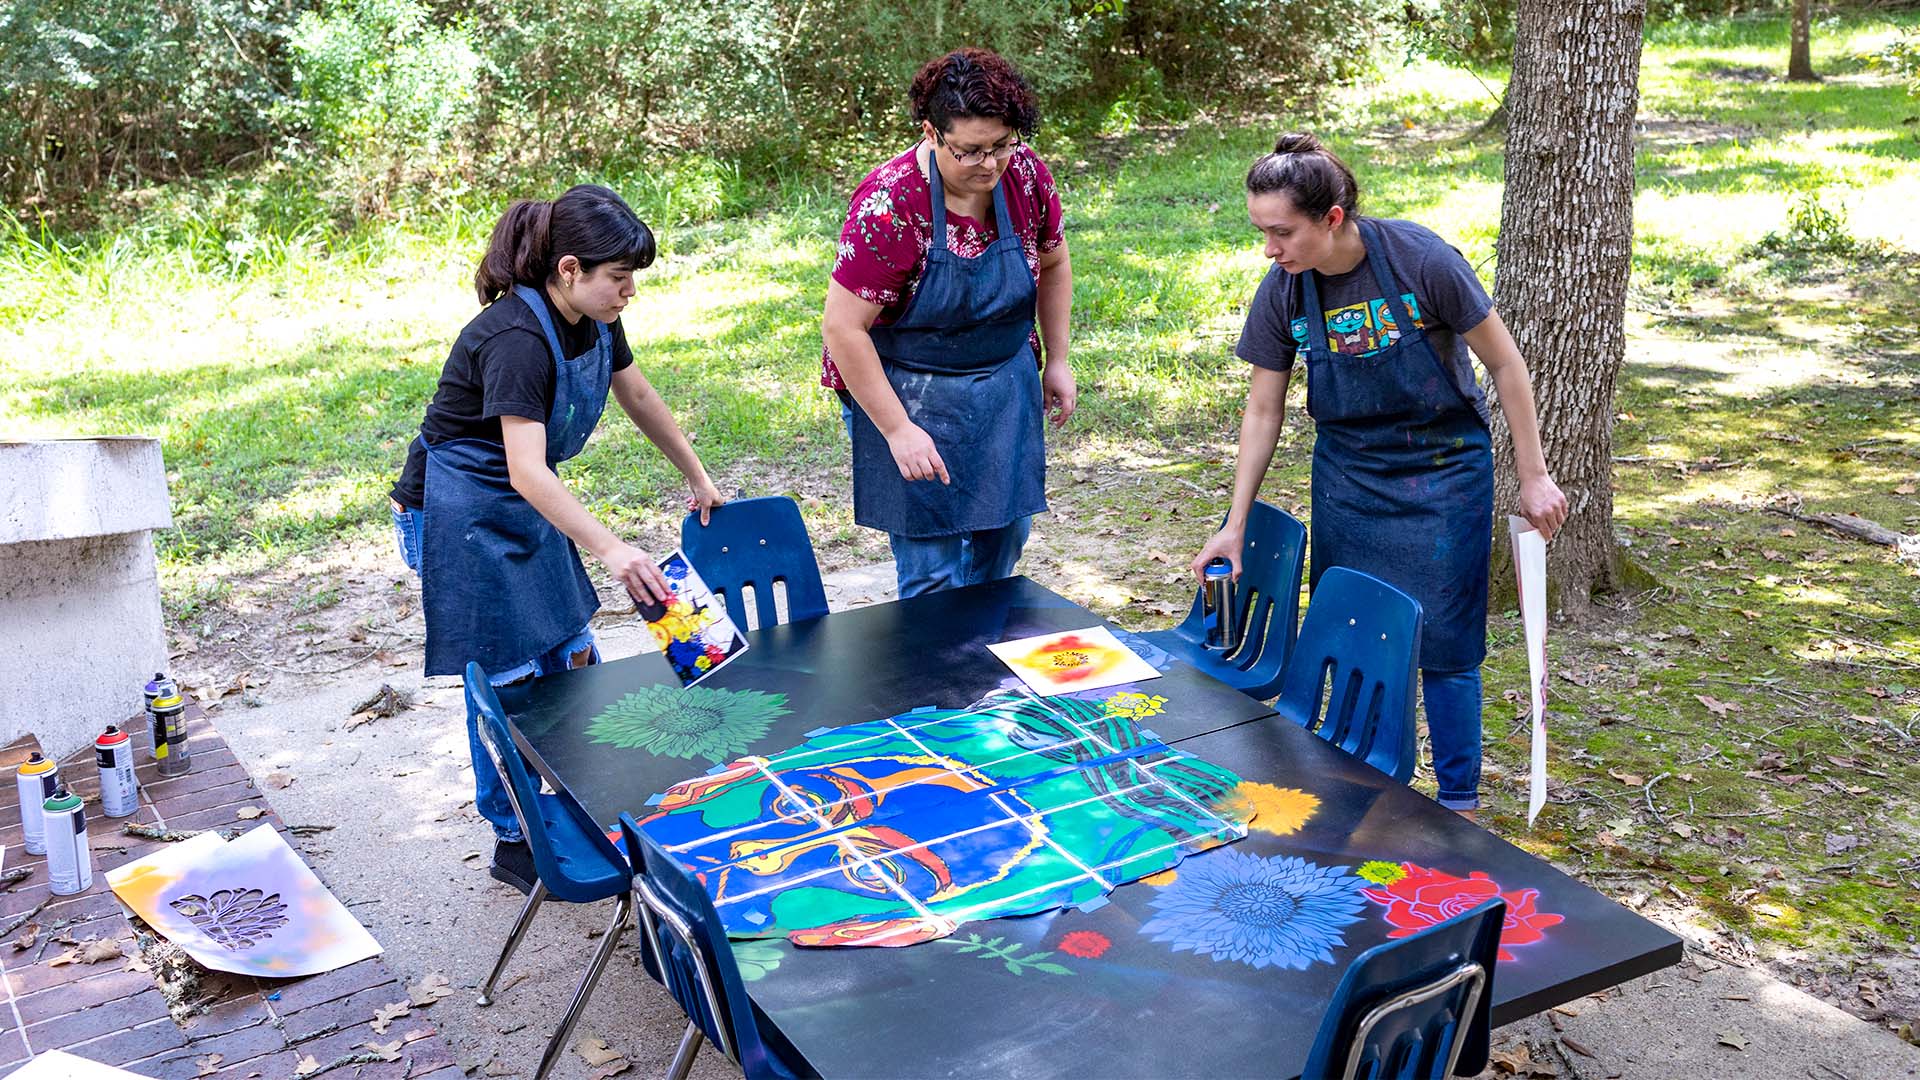 Three students in aprons gathered around a Frida Kahlo mural, set up on a low table outdoors